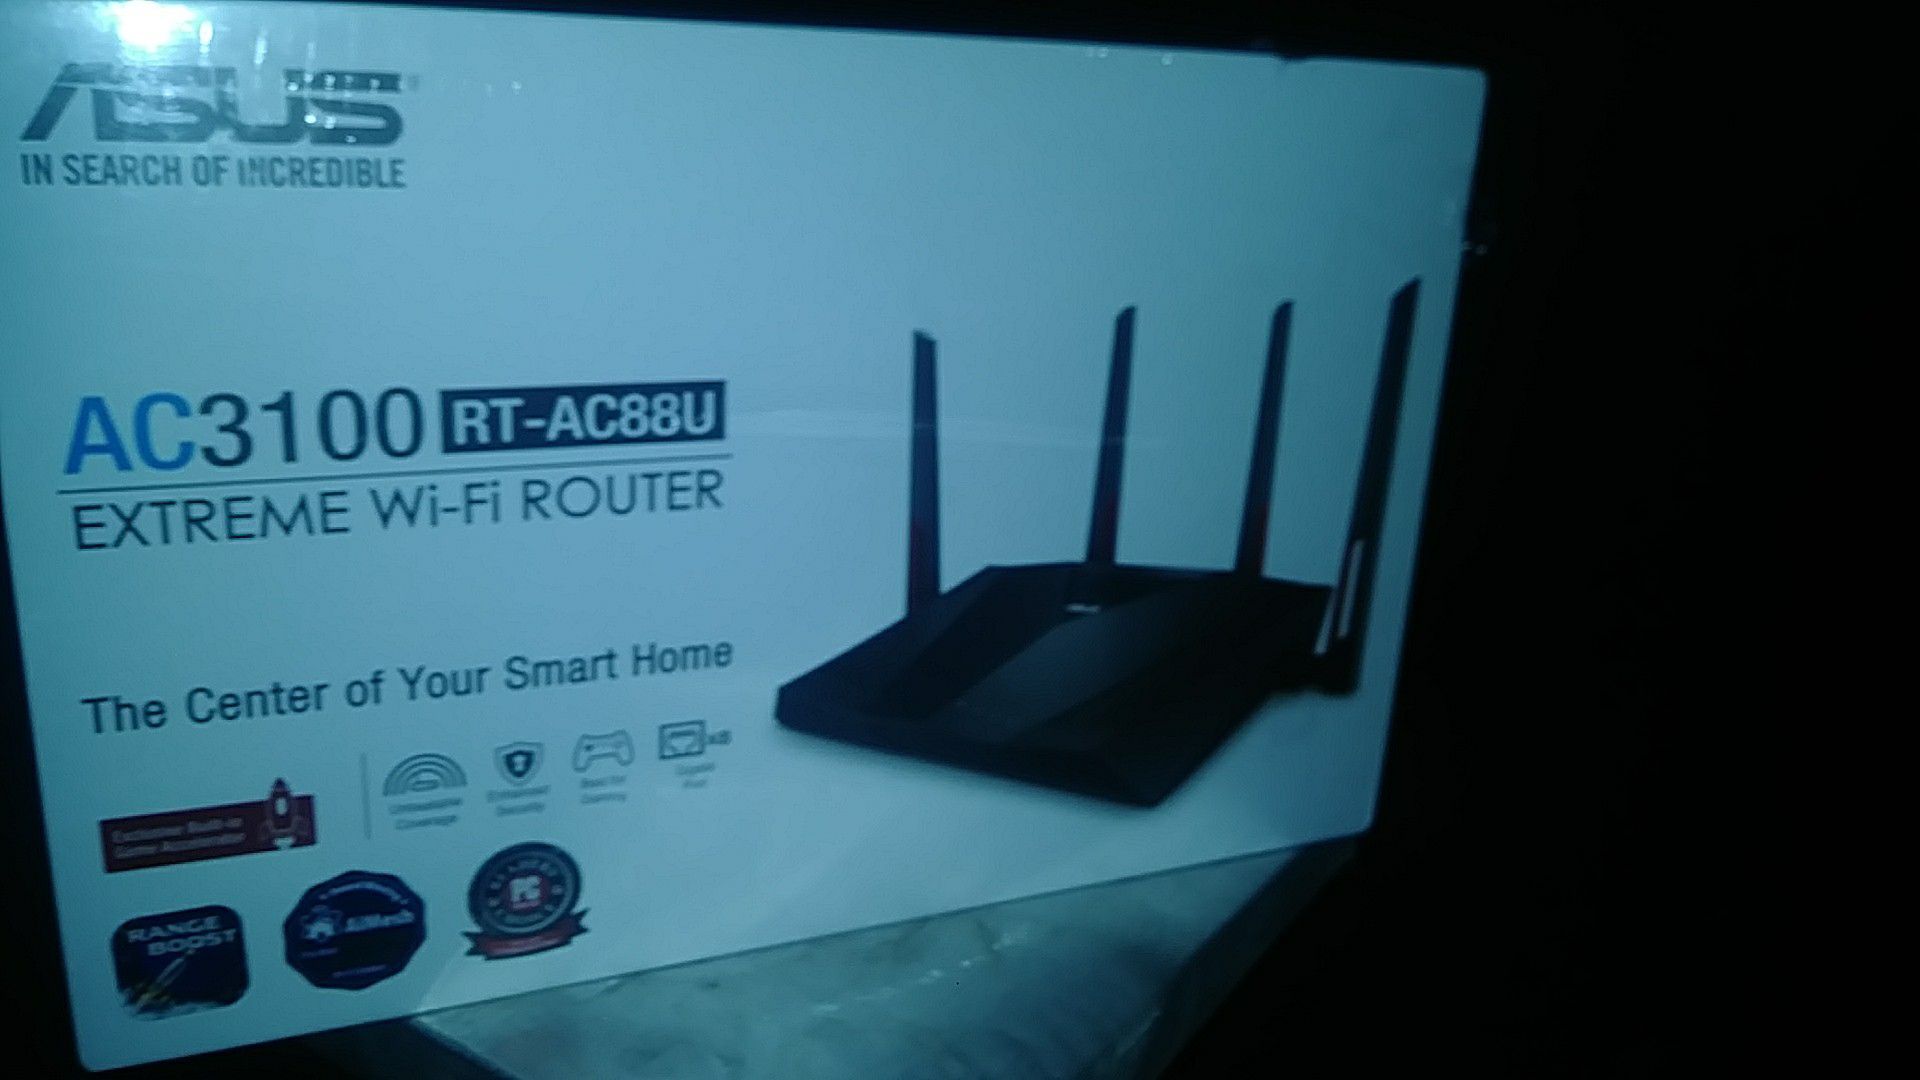 ASUS- AC3100 (RT-AC88U) Extreme Wi-Fi Router